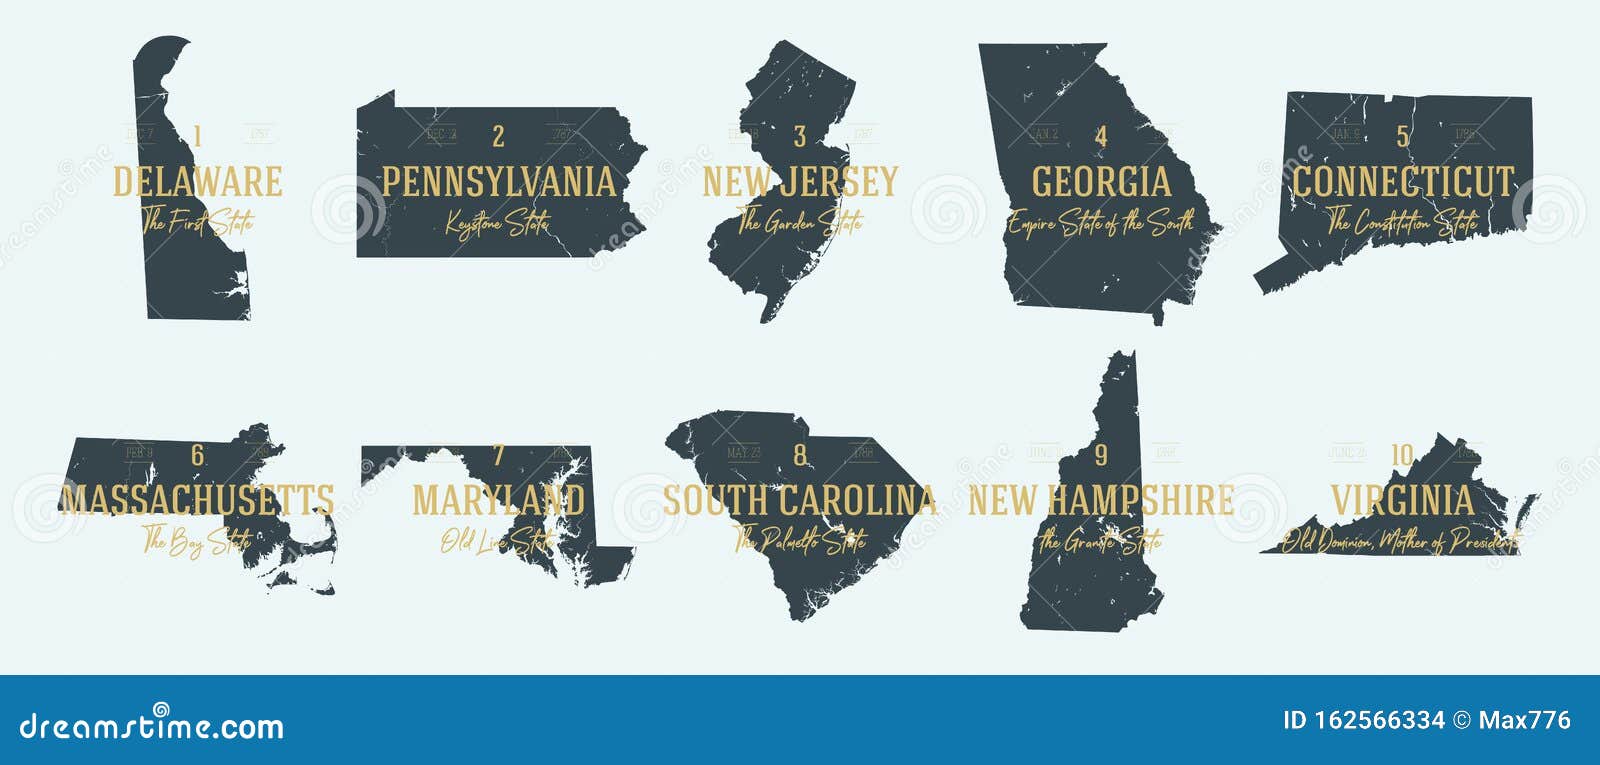 set 1 of 5 highly detailed  silhouettes of usa state maps with names and territory nicknames